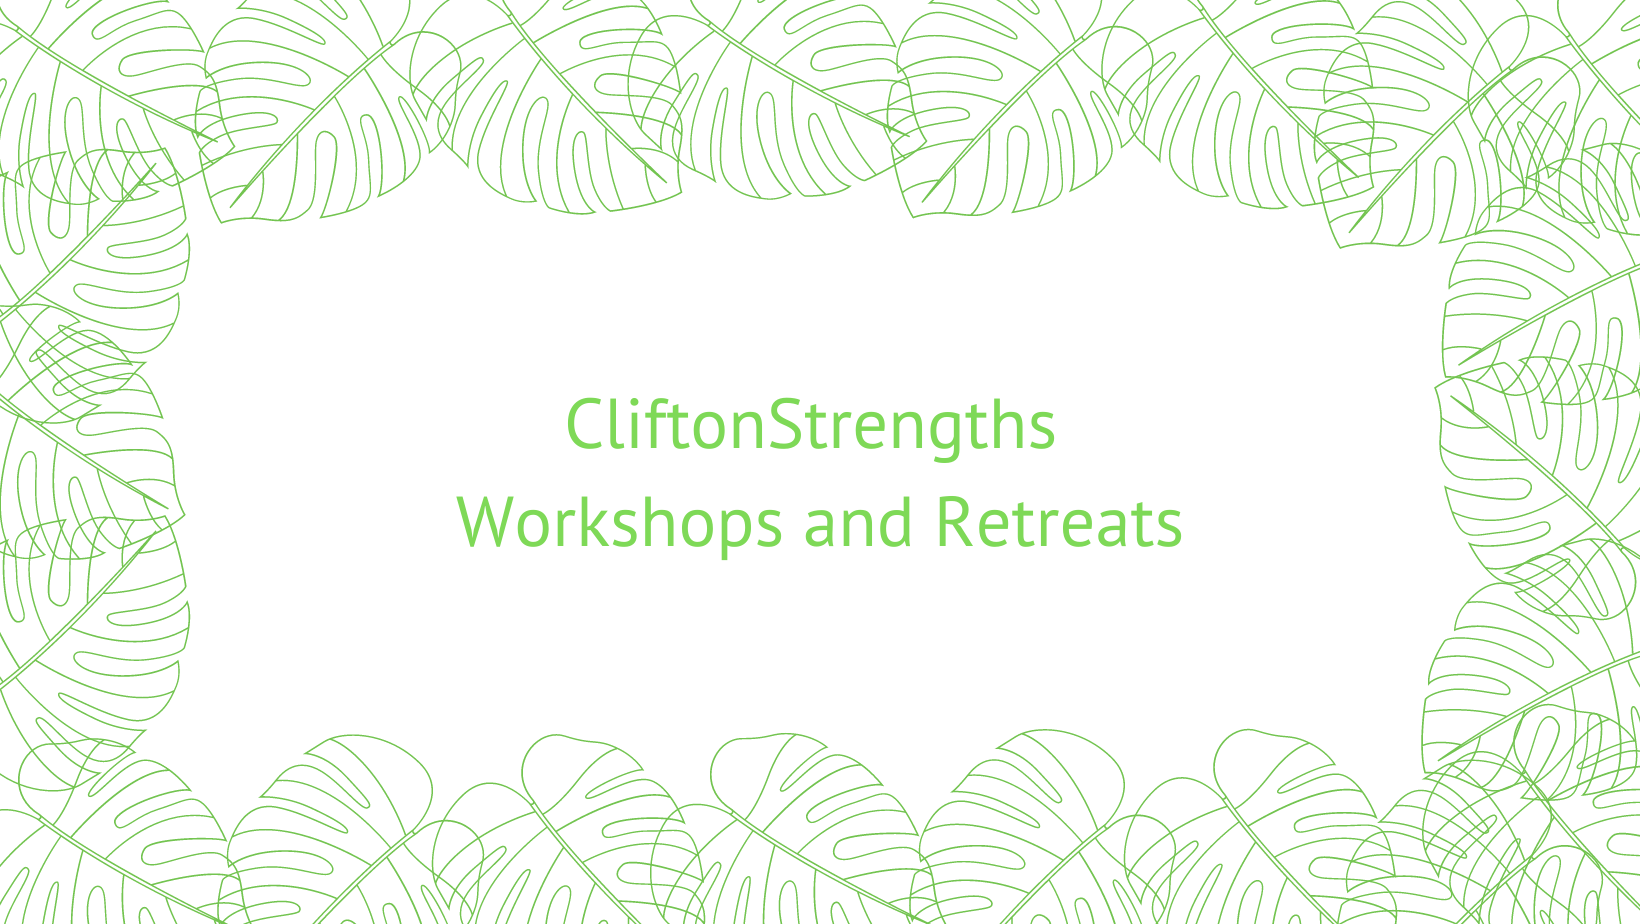 CliftonStrengths Workshops and Retreats